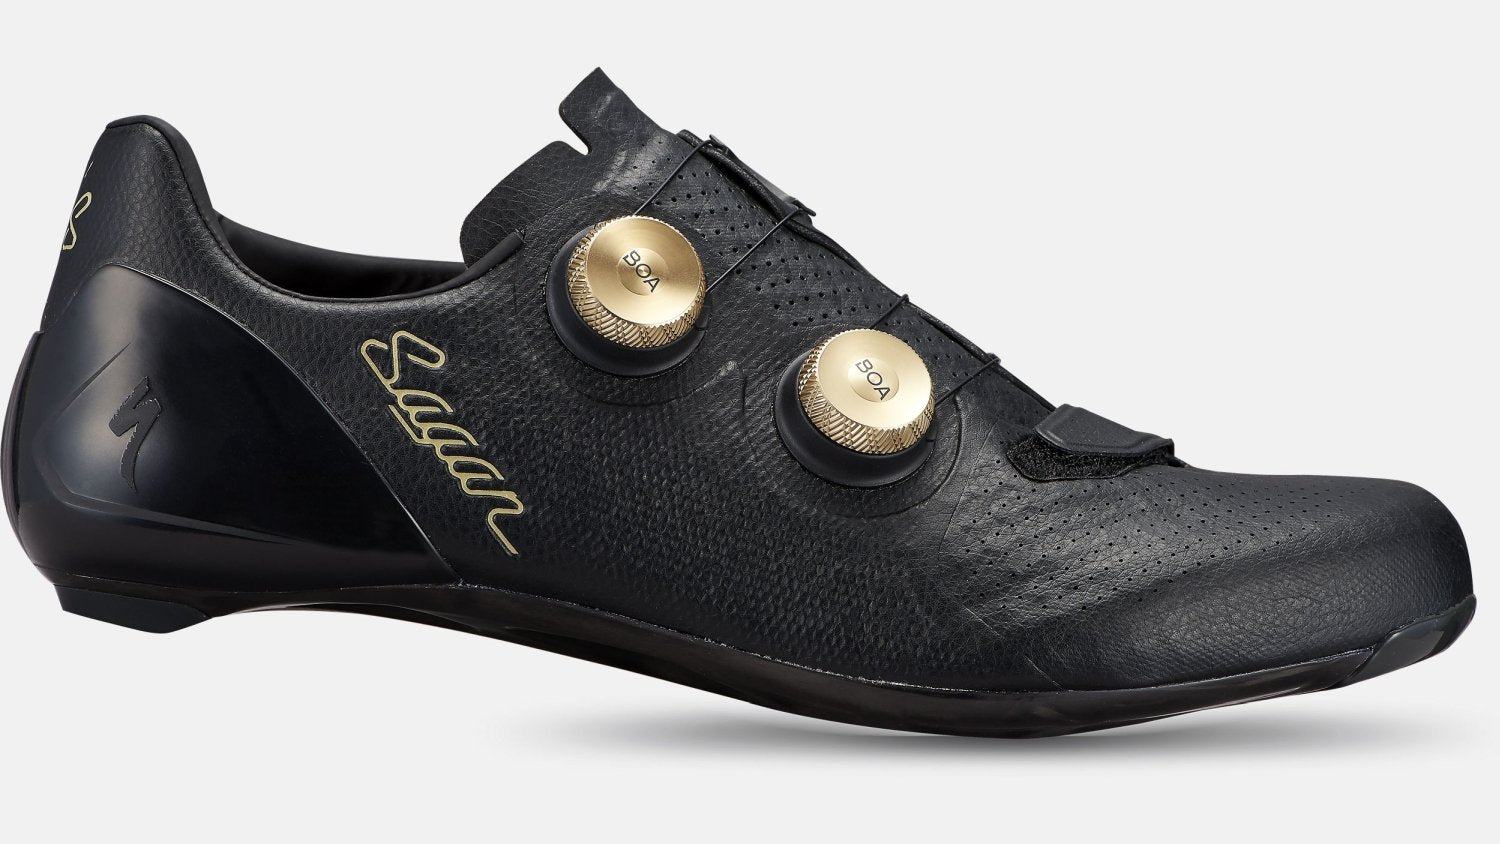 Specialized S-Works 7 Road Shoes - Sagan Collection: Disruption - Liquid-Life